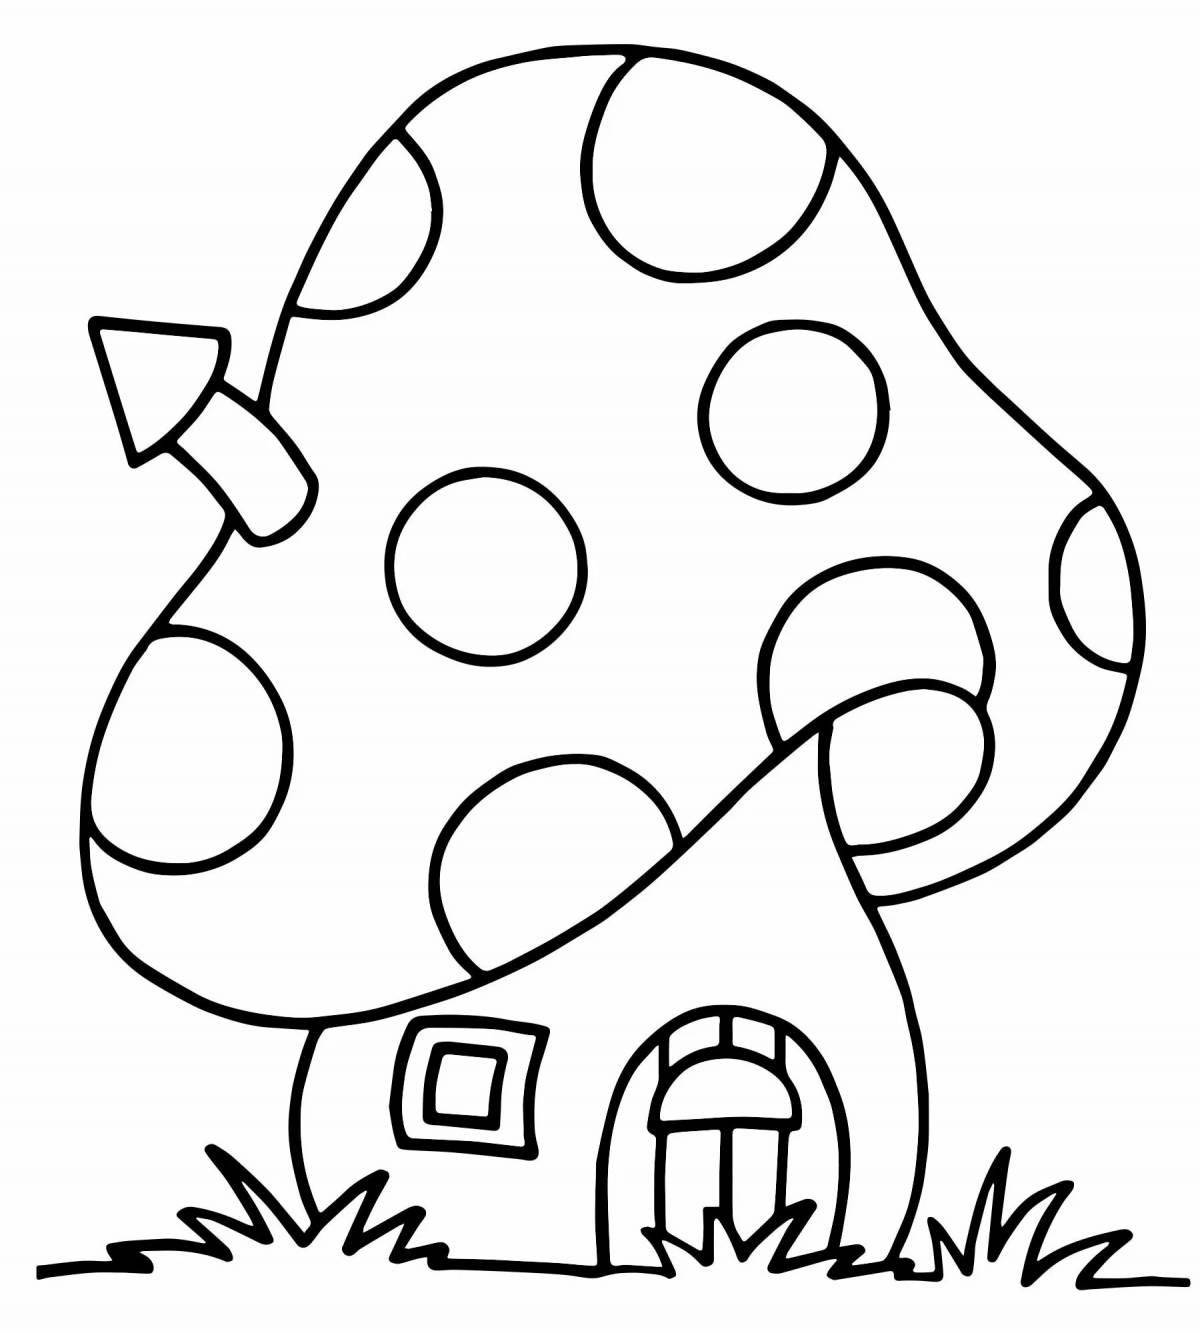 Colorful coloring pages for kids